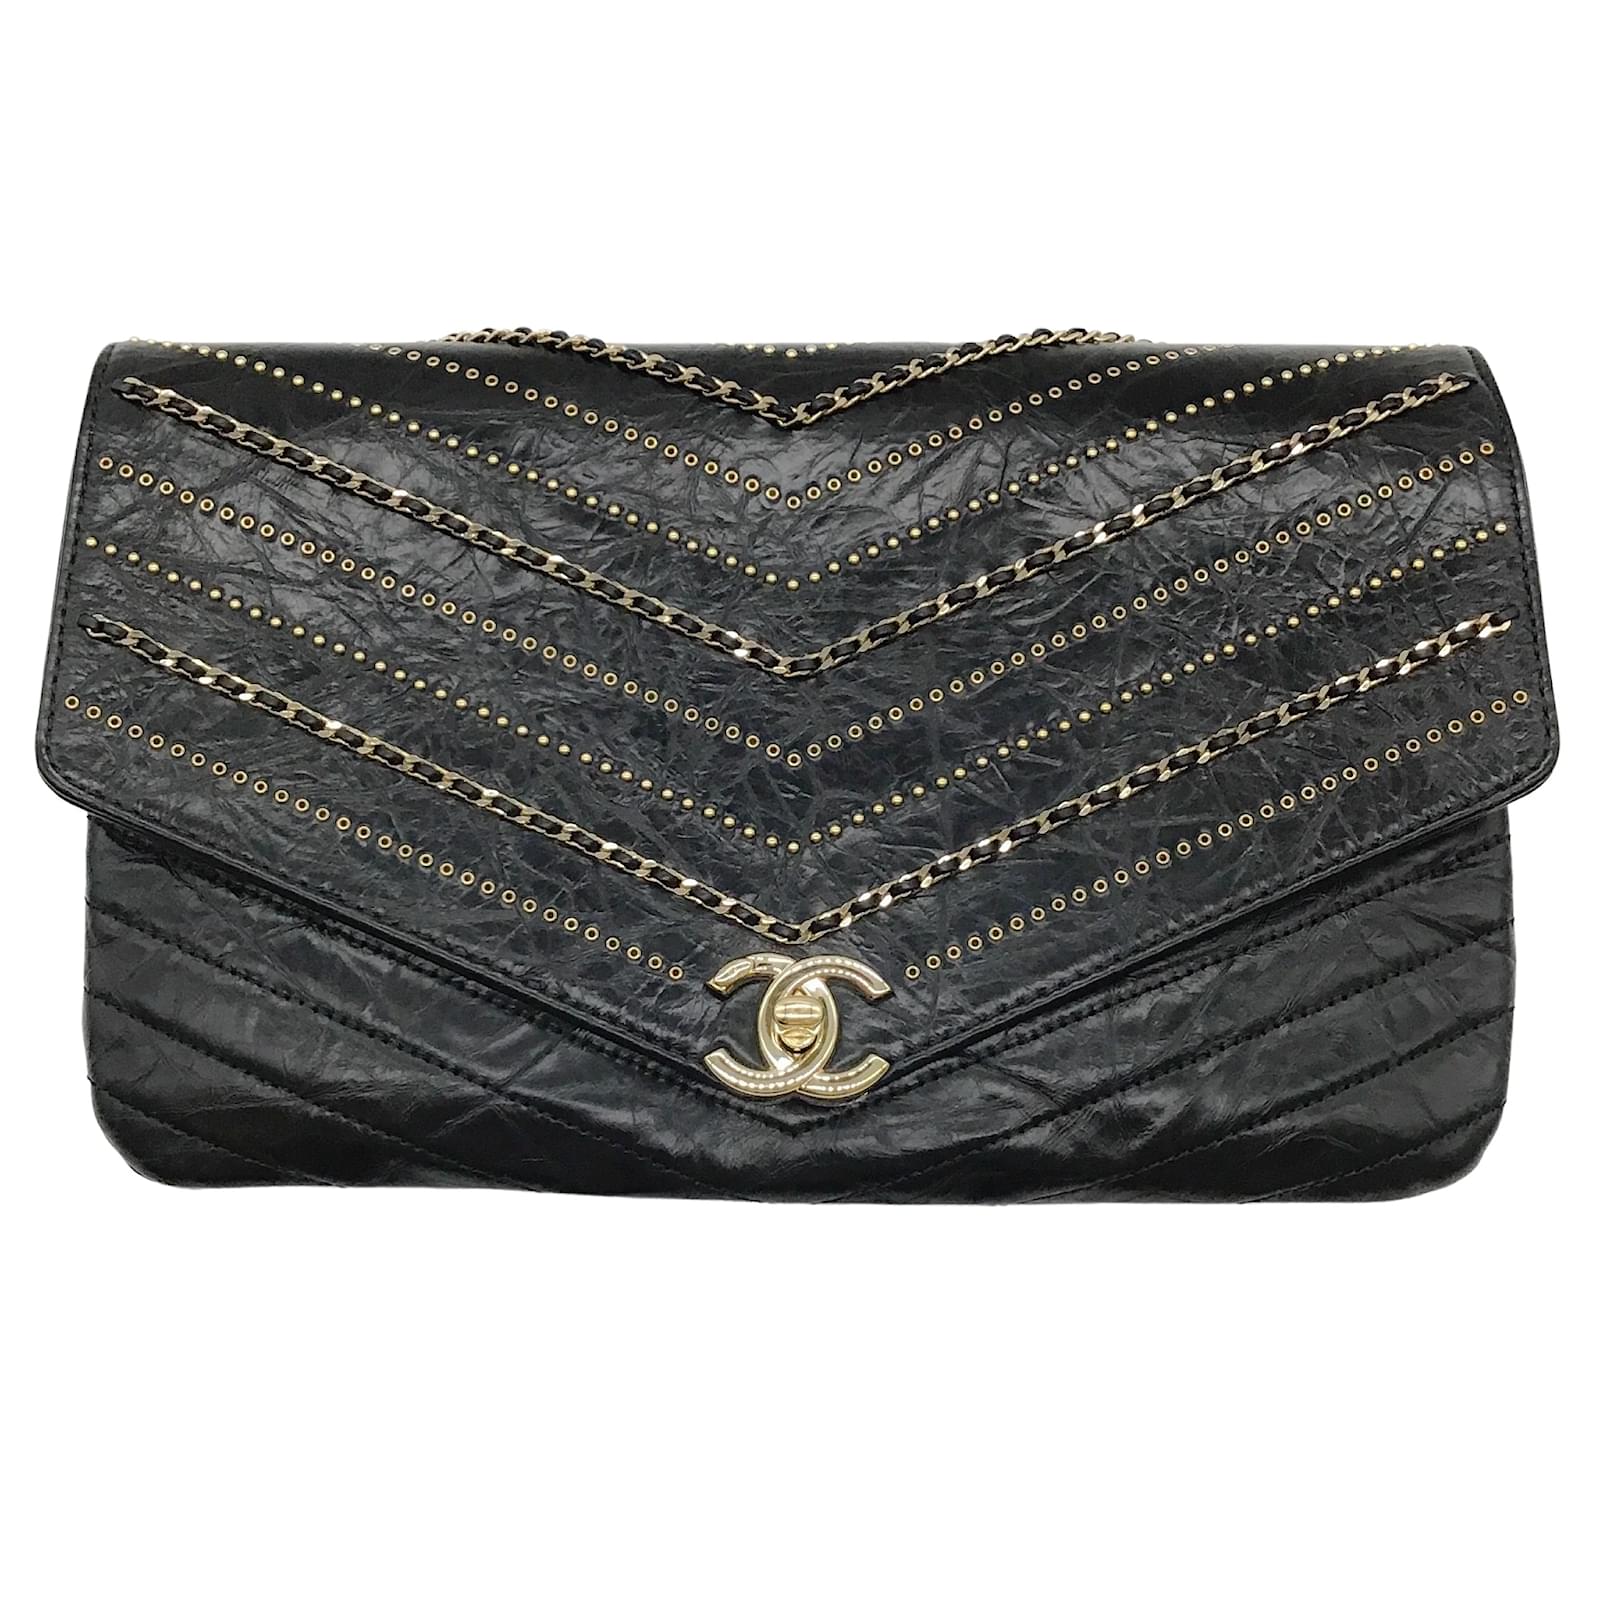 Handbags Chanel Chanel 2018 Black Leather Clutch with Gold Chain Detail